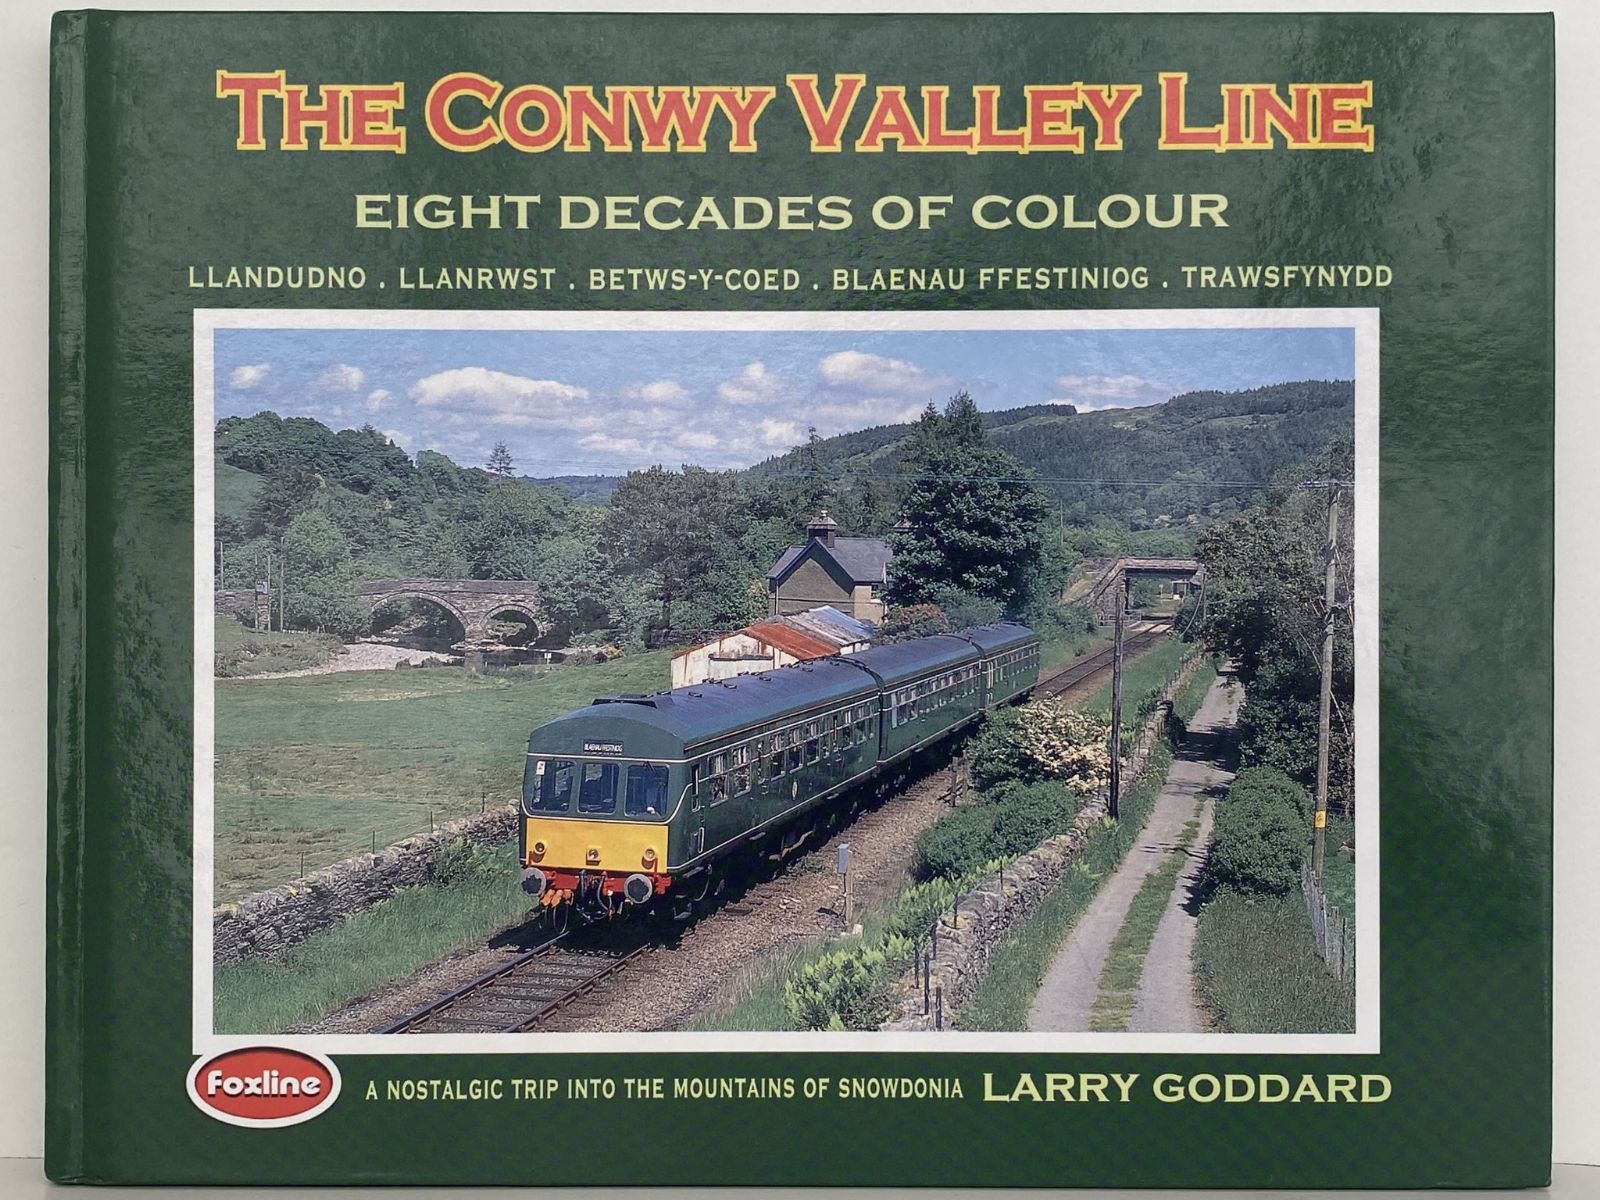 THE CONWAY VALLEY LINE: Eight Decades of Colour